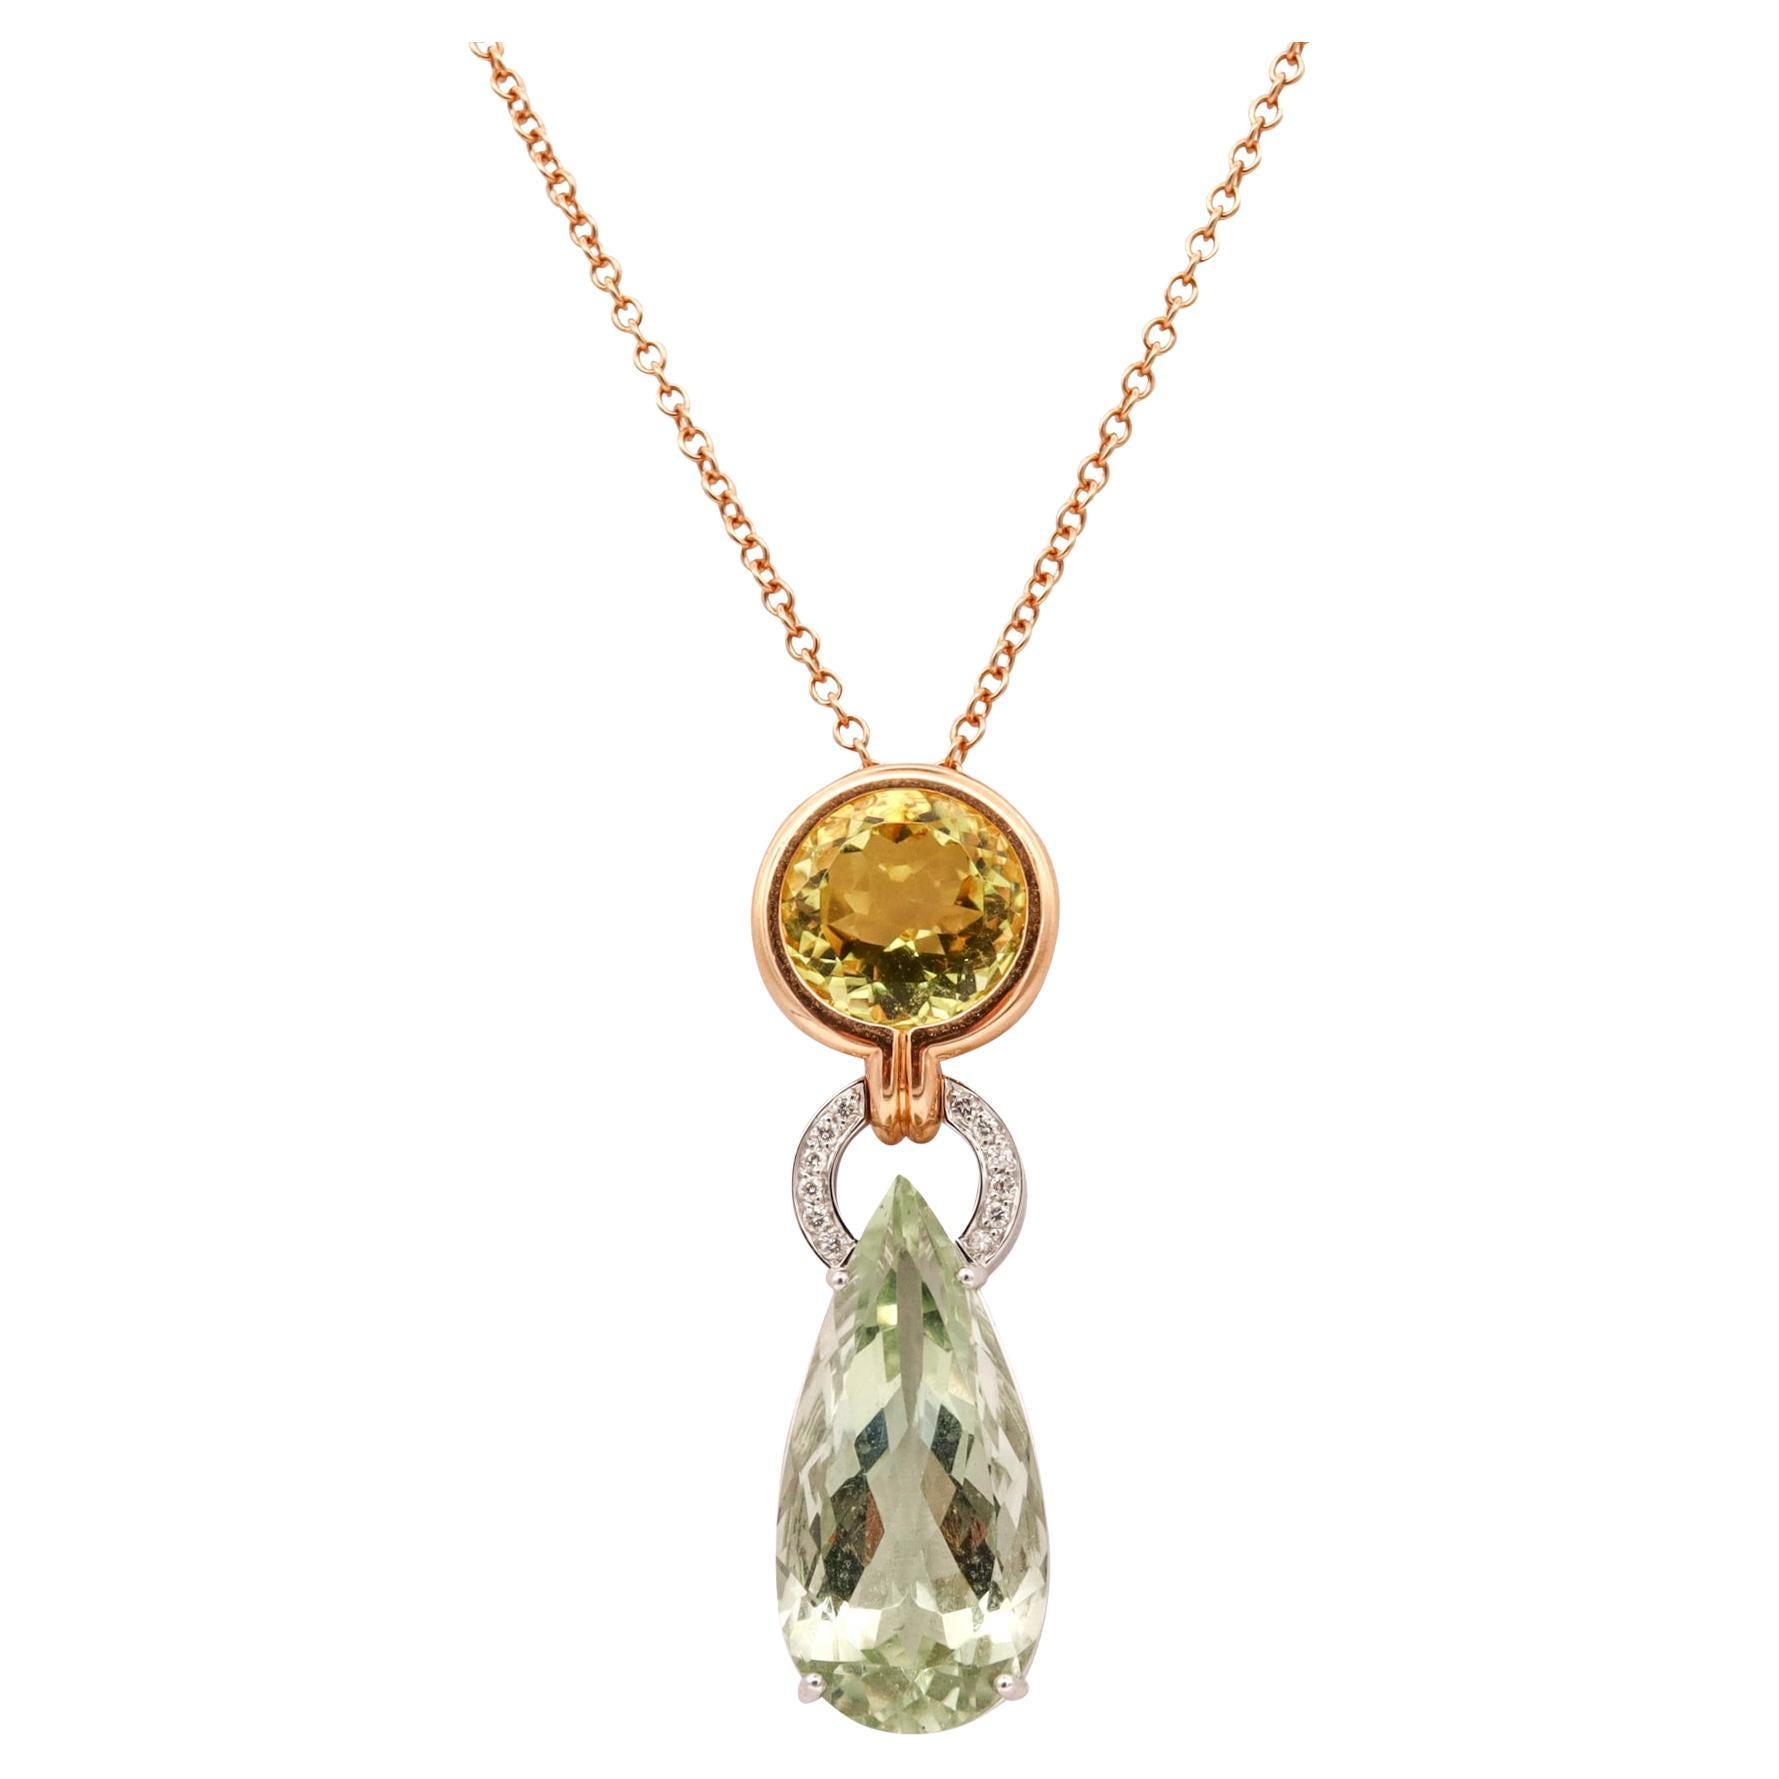 Salavetti Milano Chained Necklace 18Kt Rose Gold 26.85 Cts Diamonds & Gemstones For Sale